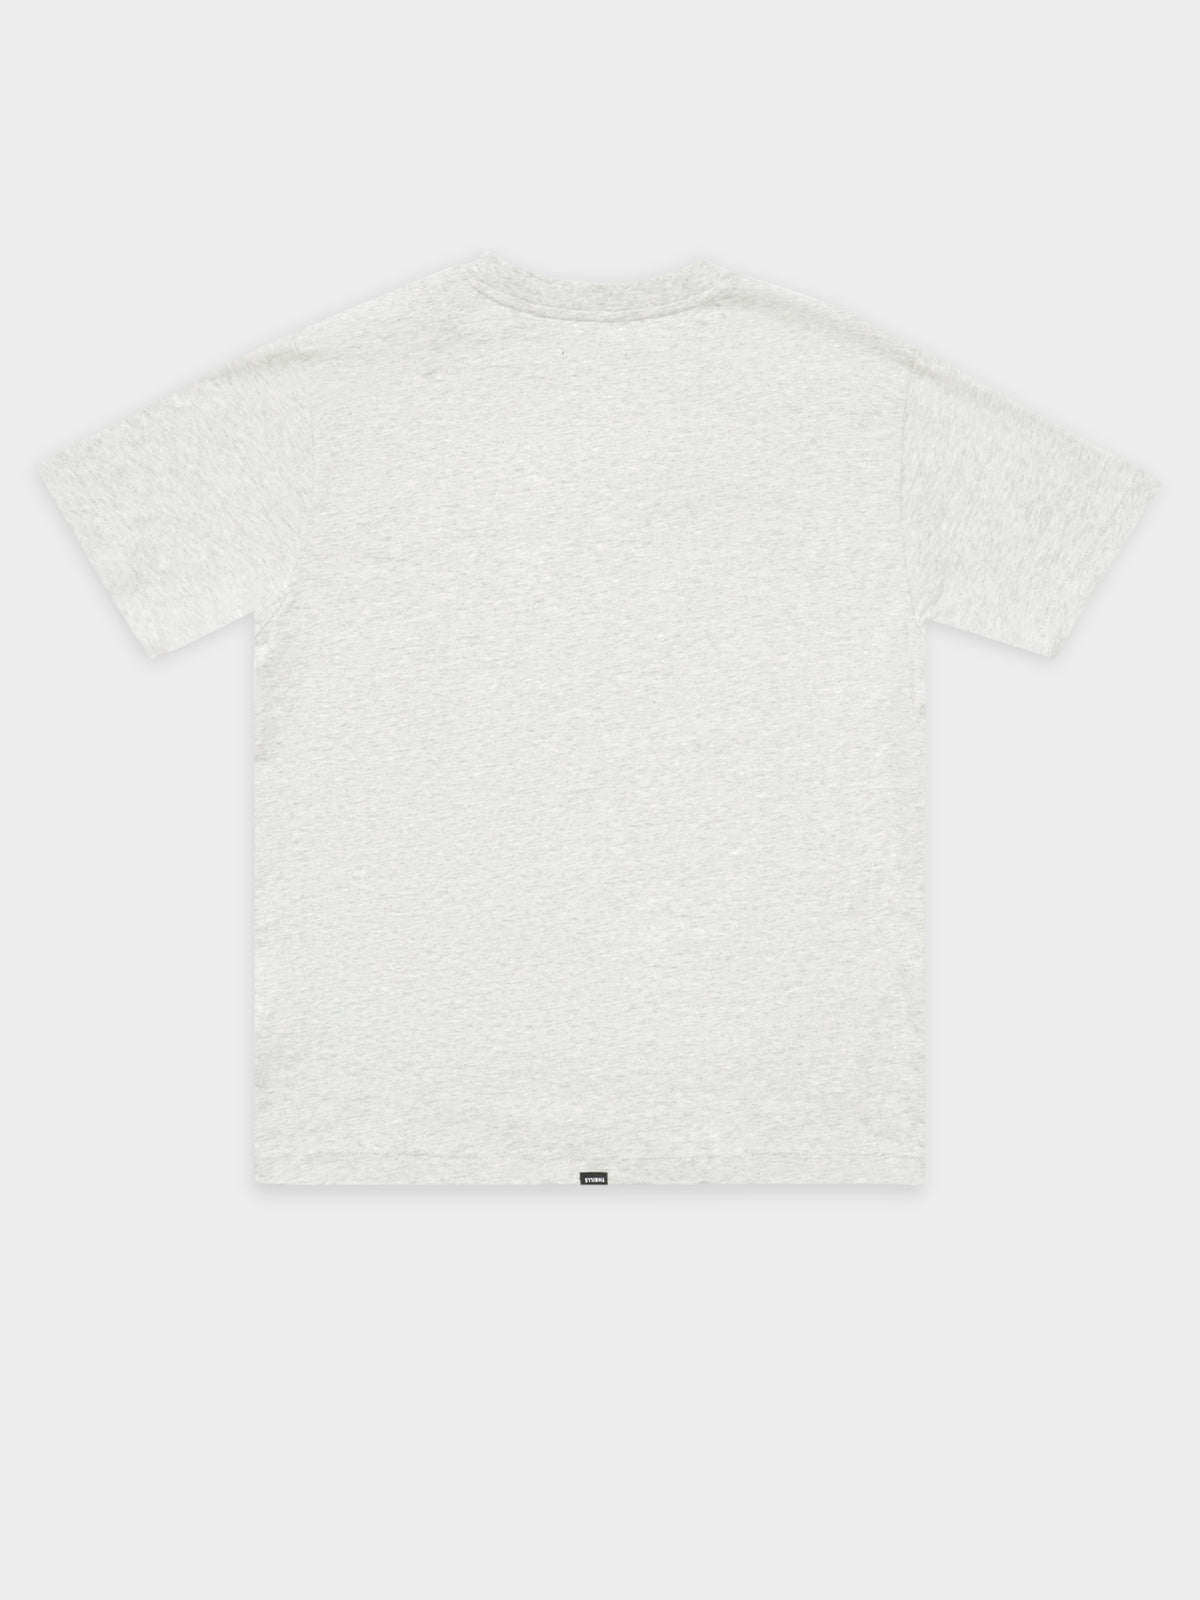 Diversion Merch Fit T-Shirt in Snow Marle